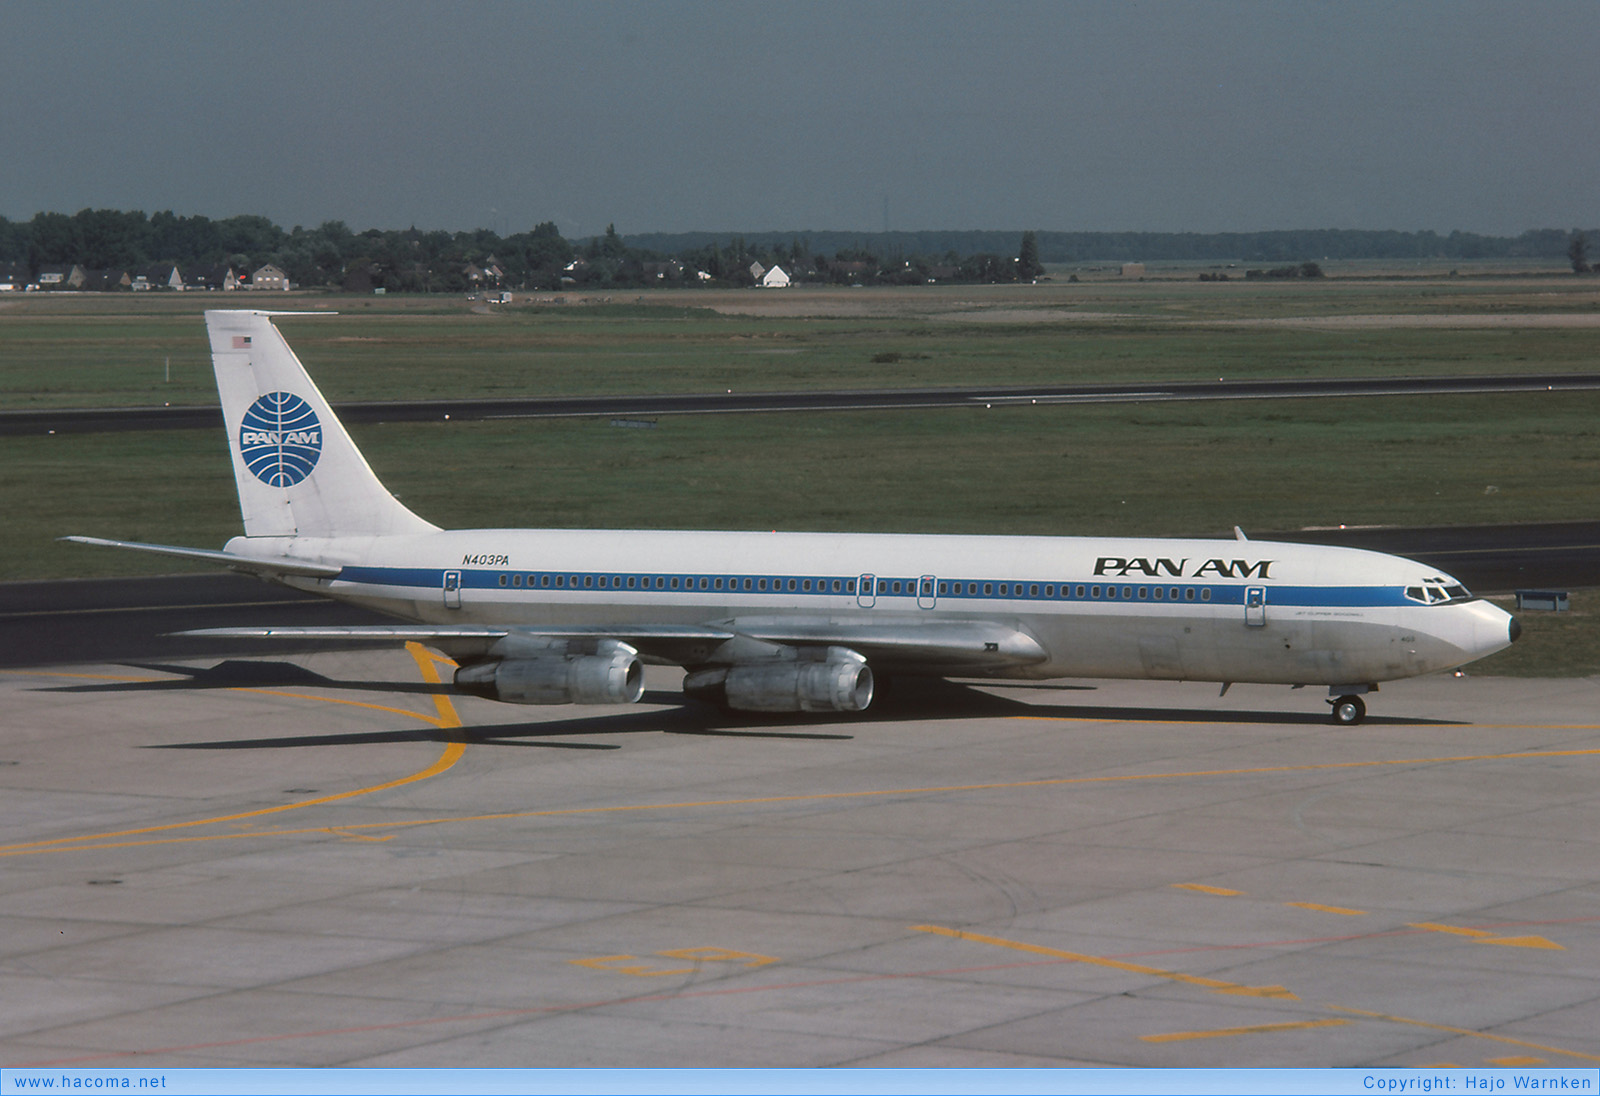 Photo of N403PA - Pan Am Clipper Goodwill - Dusseldorf Airport - Sep 1976